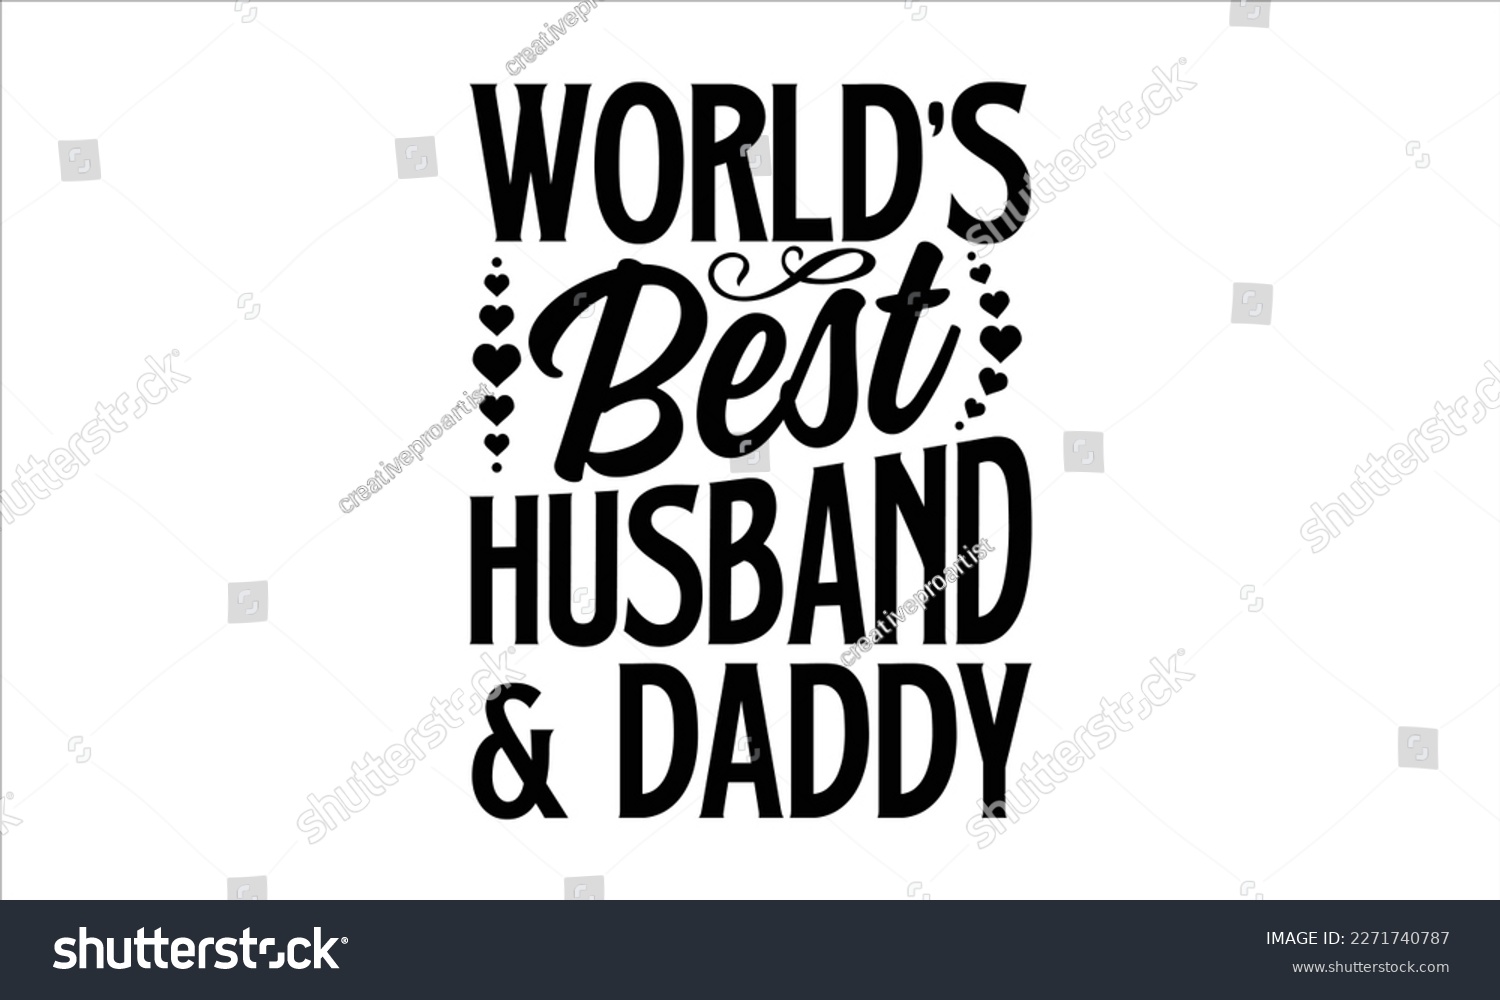 SVG of world’s Best Husband  Daddy- Father's Day svg design, Hand drawn lettering phrase isolated on white background, Illustration for prints on t-shirts and bags, posters, cards eps 10. svg